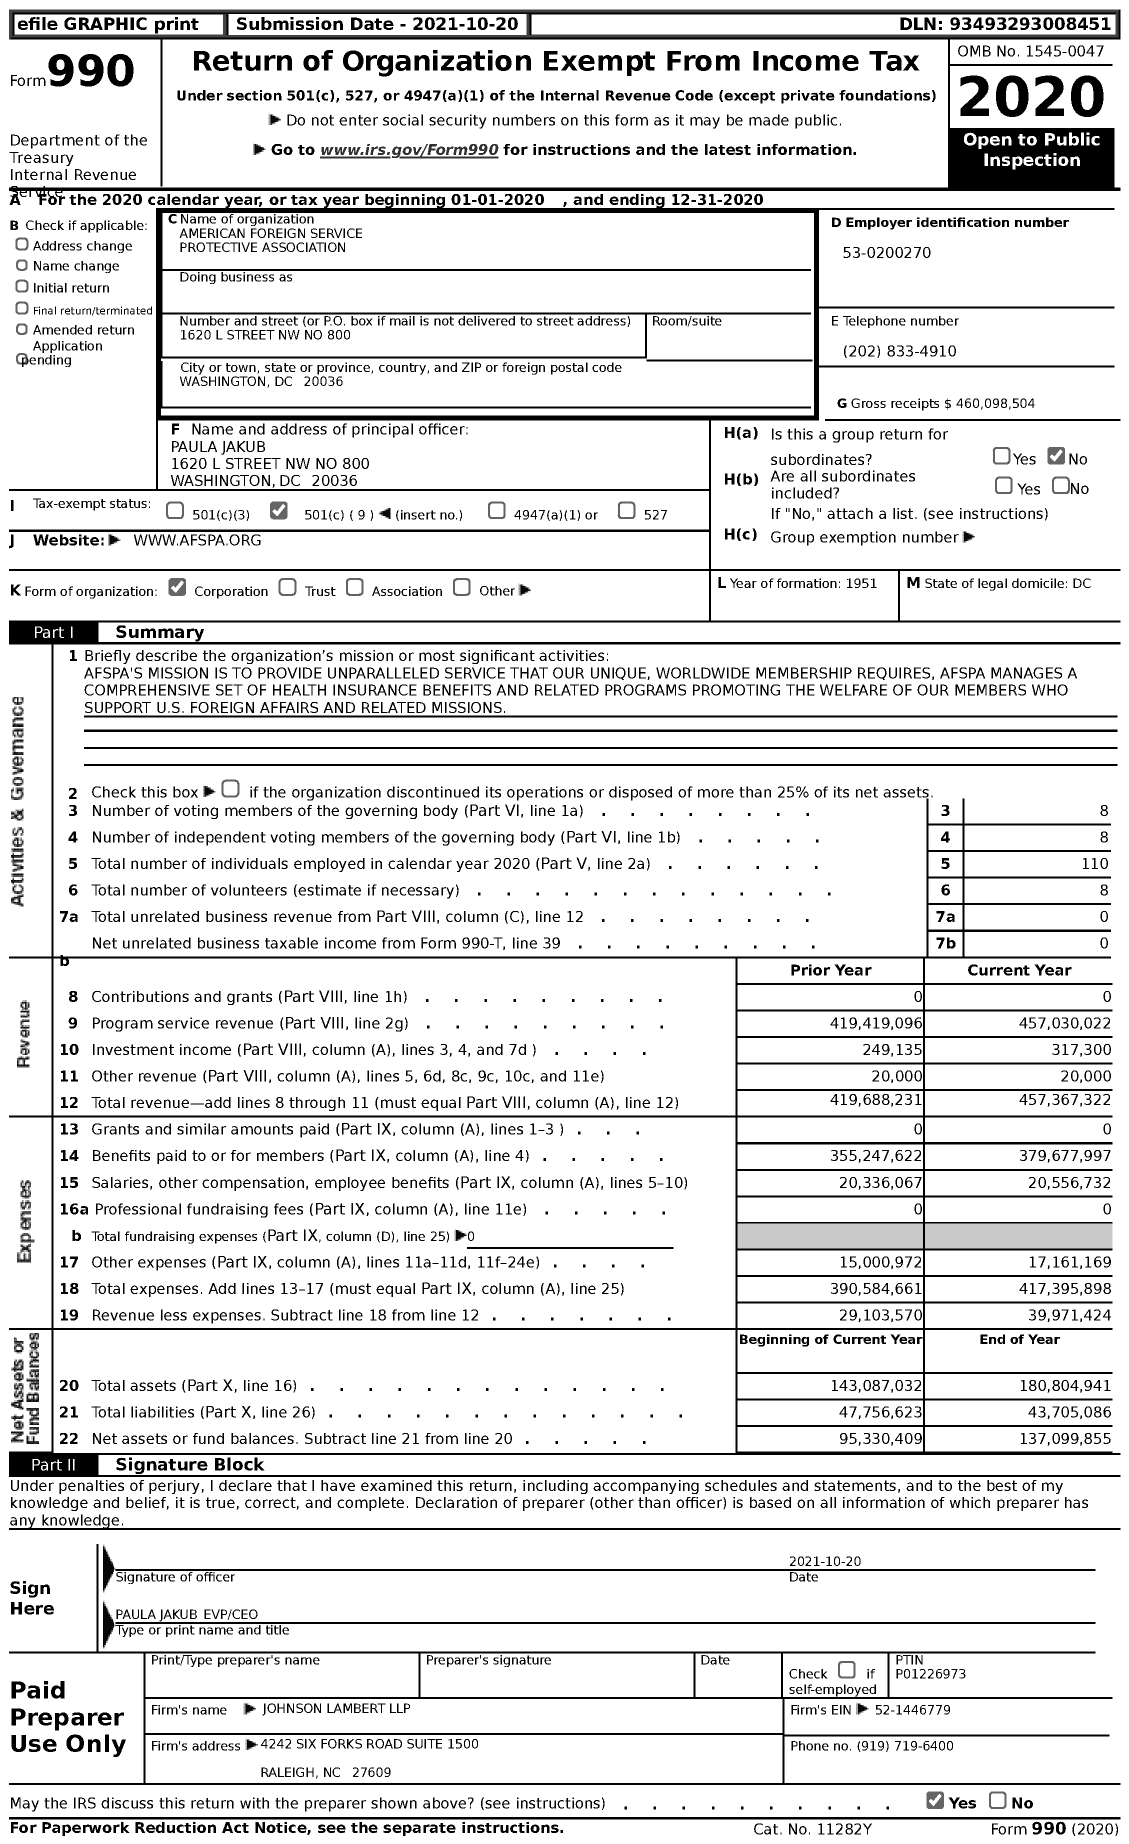 Image of first page of 2020 Form 990 for American Foreign Service Protective Association (AFSPA)